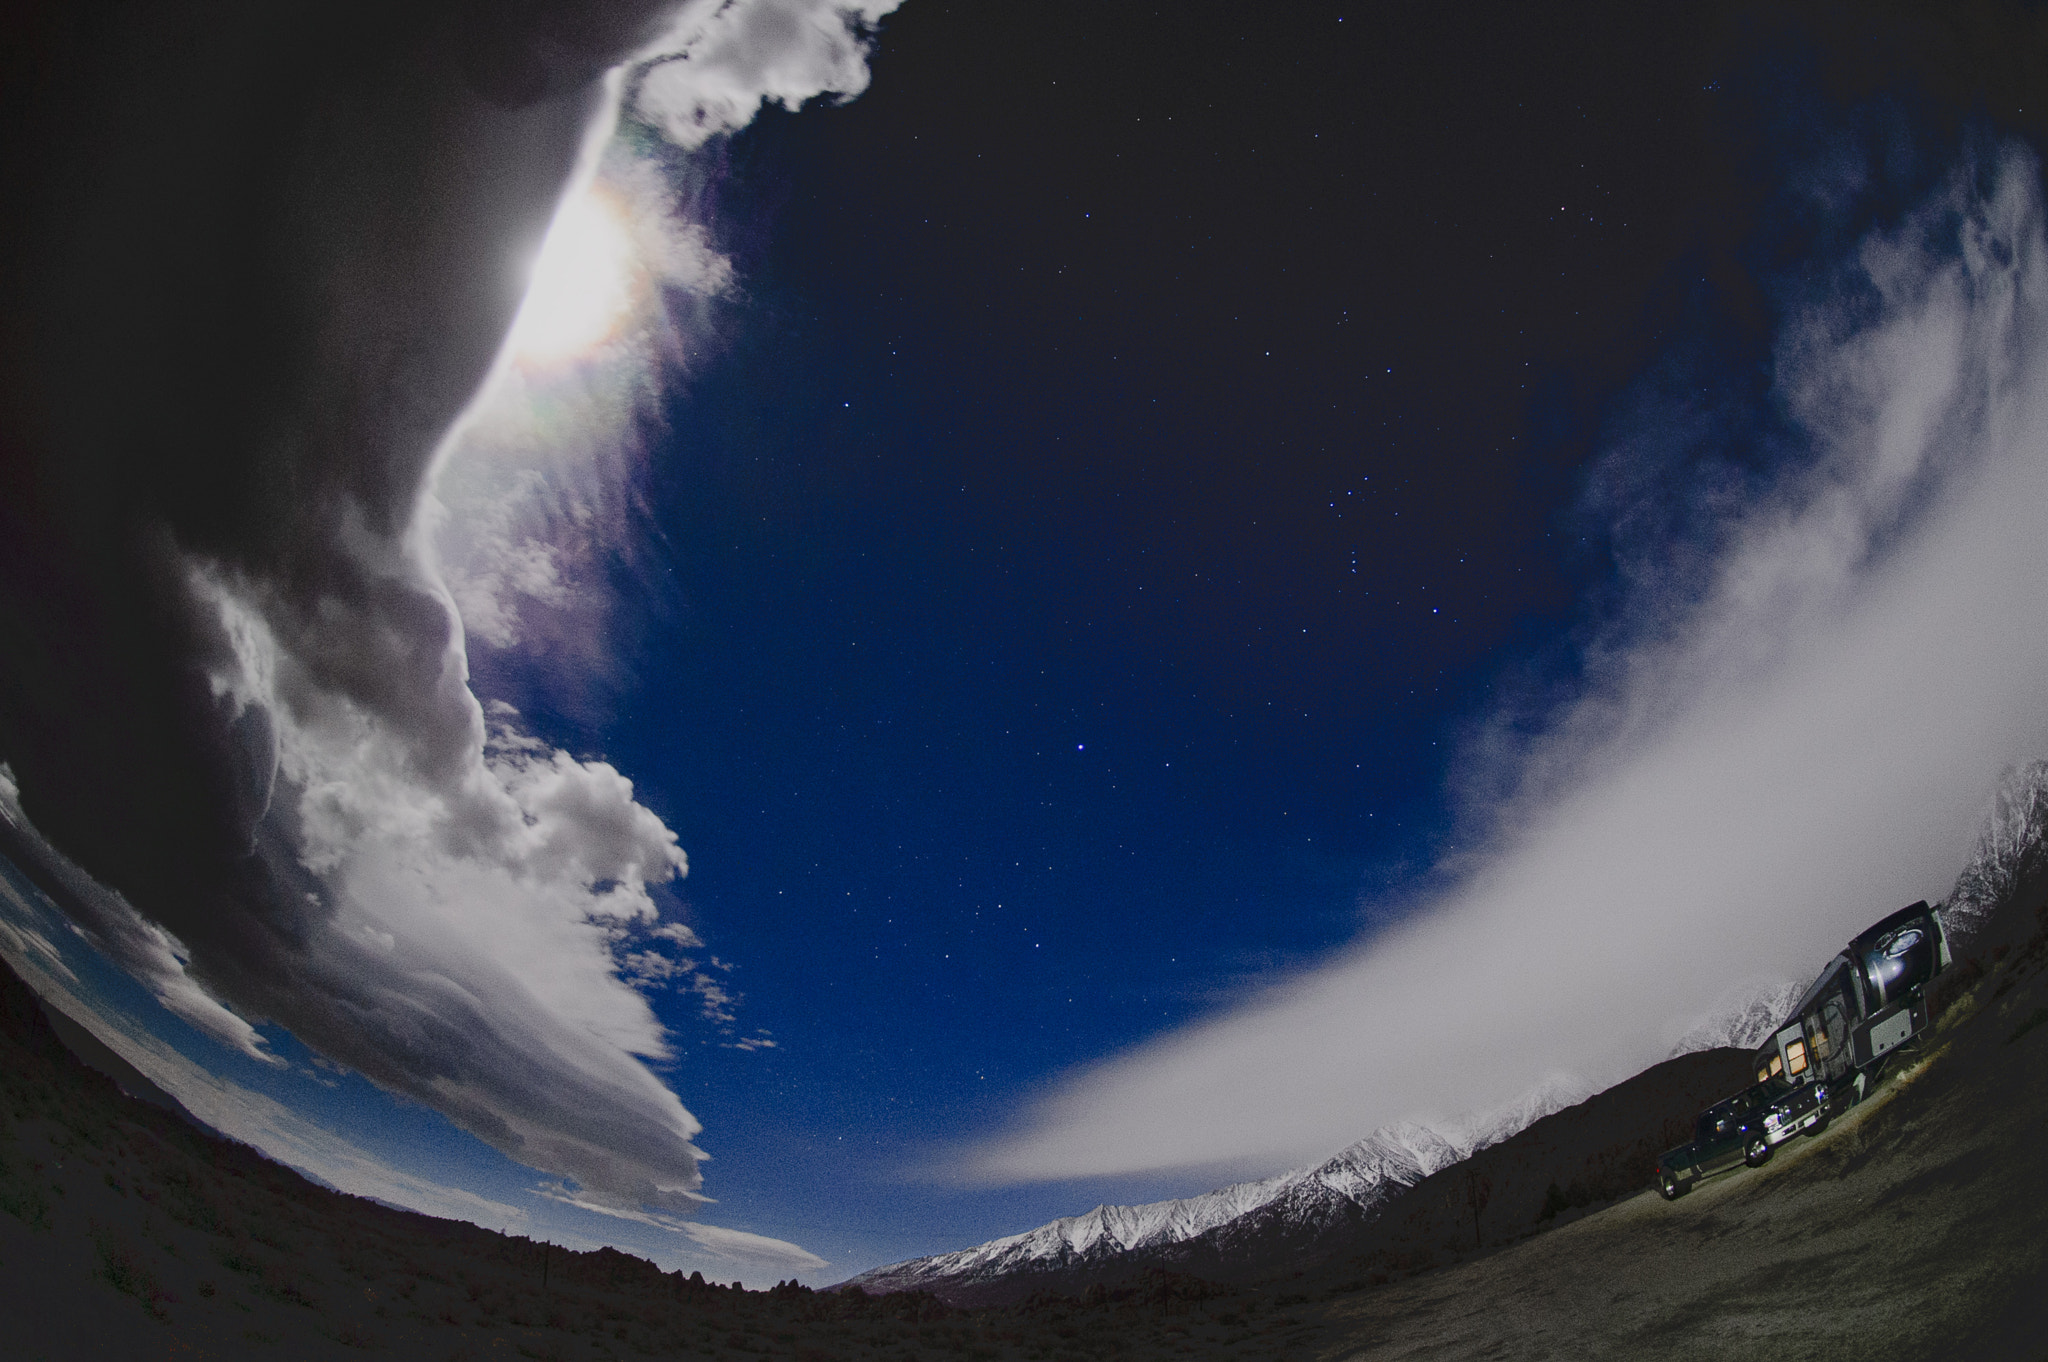 Nikon AF DX Fisheye-Nikkor 10.5mm F2.8G ED sample photo. Full moon emerging from storm clouds over mtns. photography